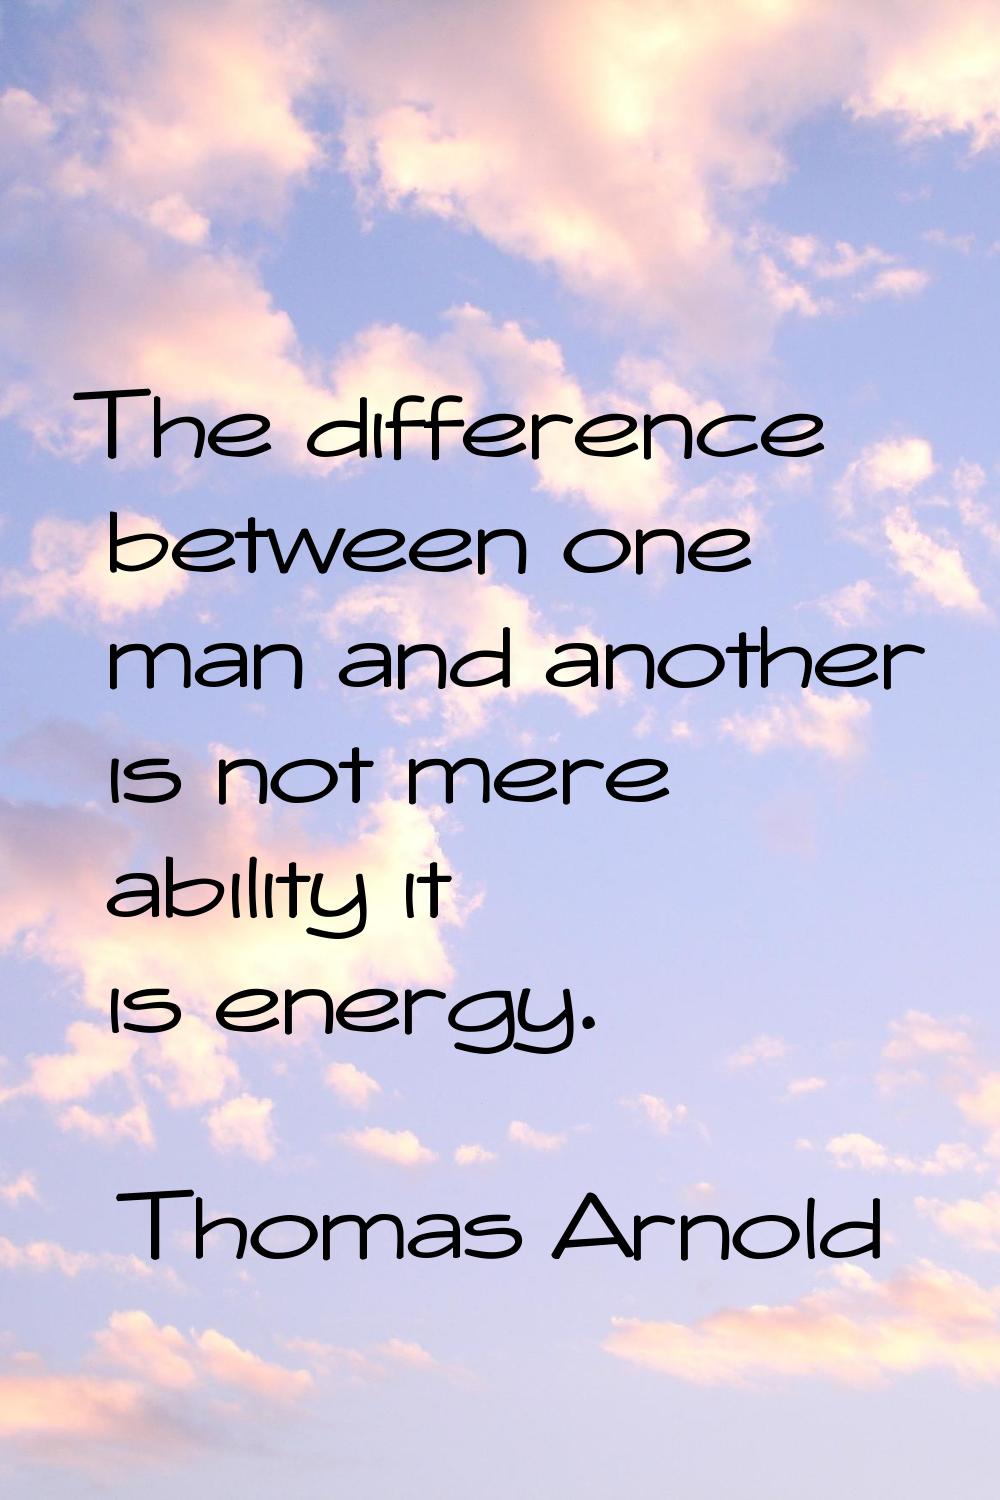 The difference between one man and another is not mere ability it is energy.